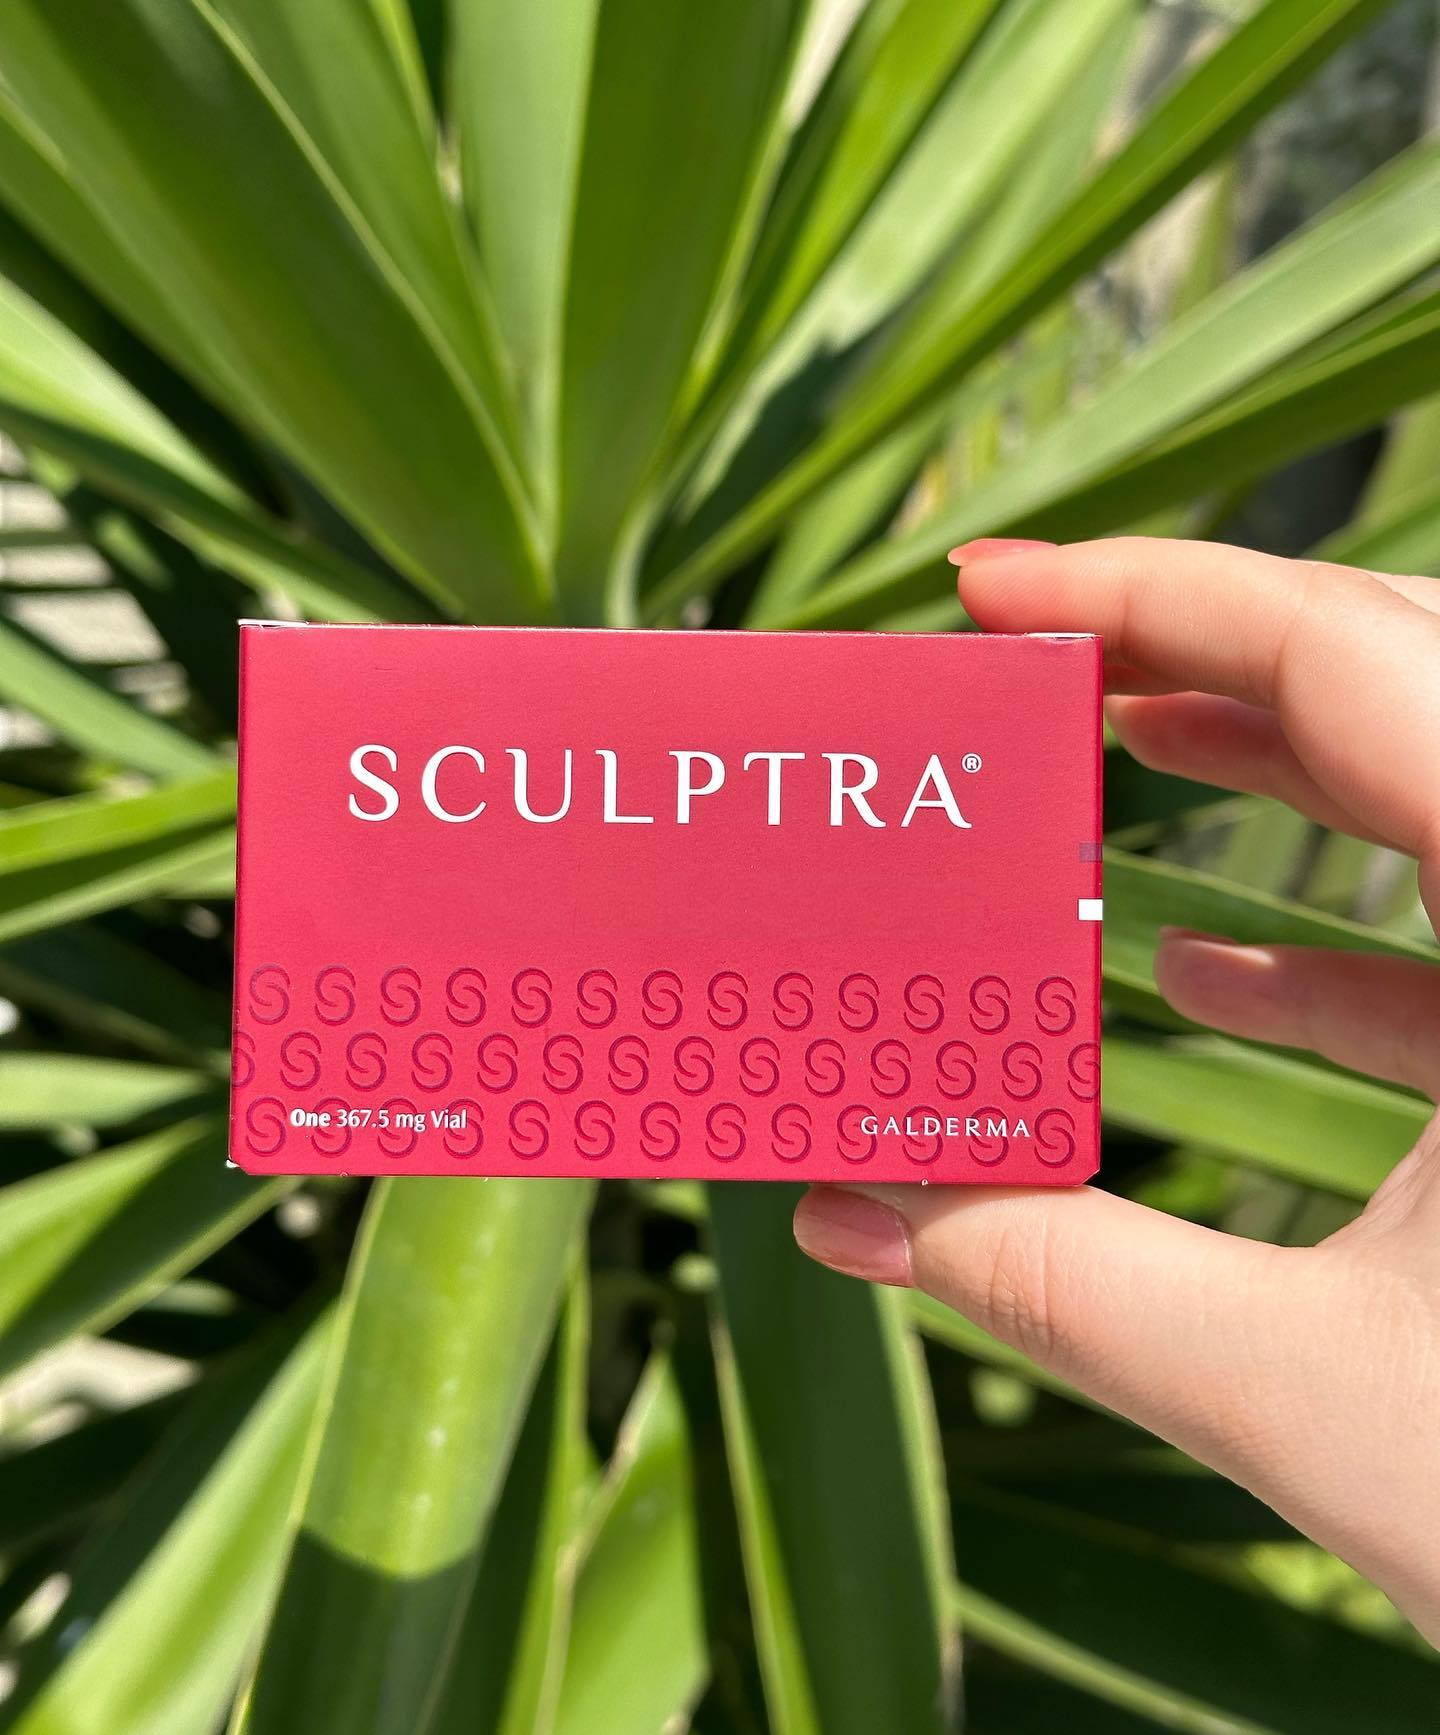 Discover Sculptra: The Collagen-Boosting Miracle at The Laser Lounge Spa & Salon Sarasota